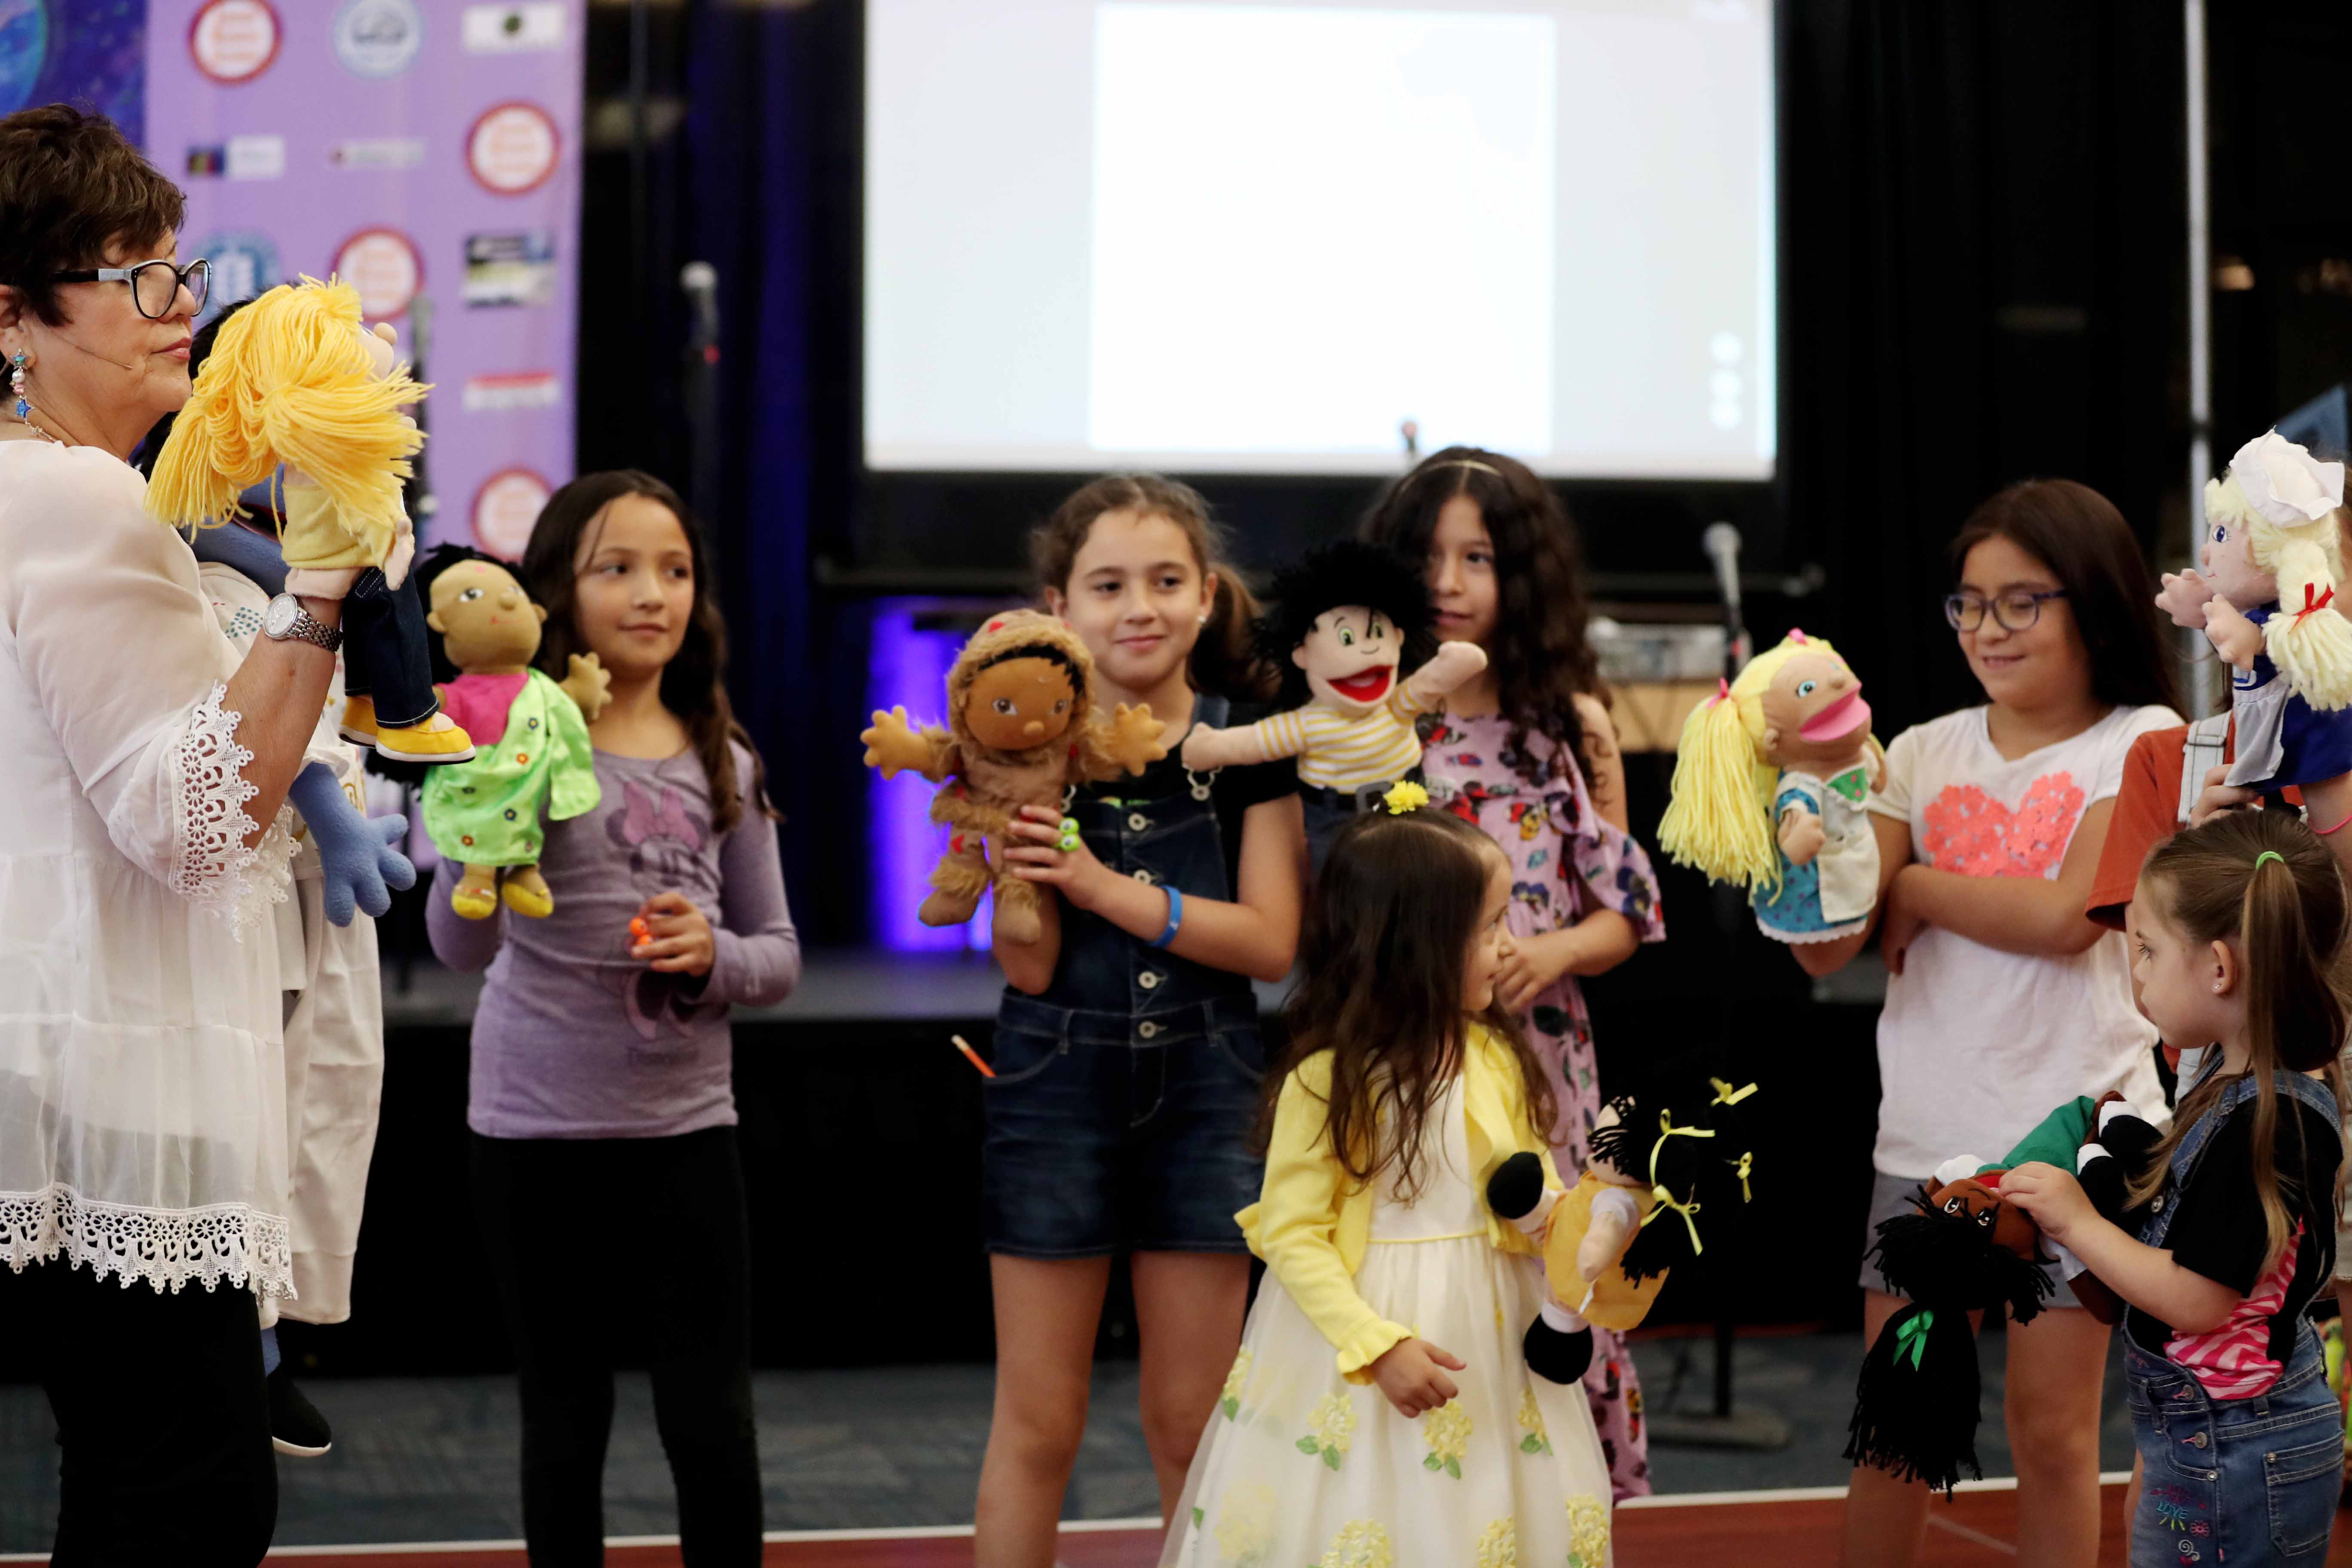 The book festival included activities such as puppetry.